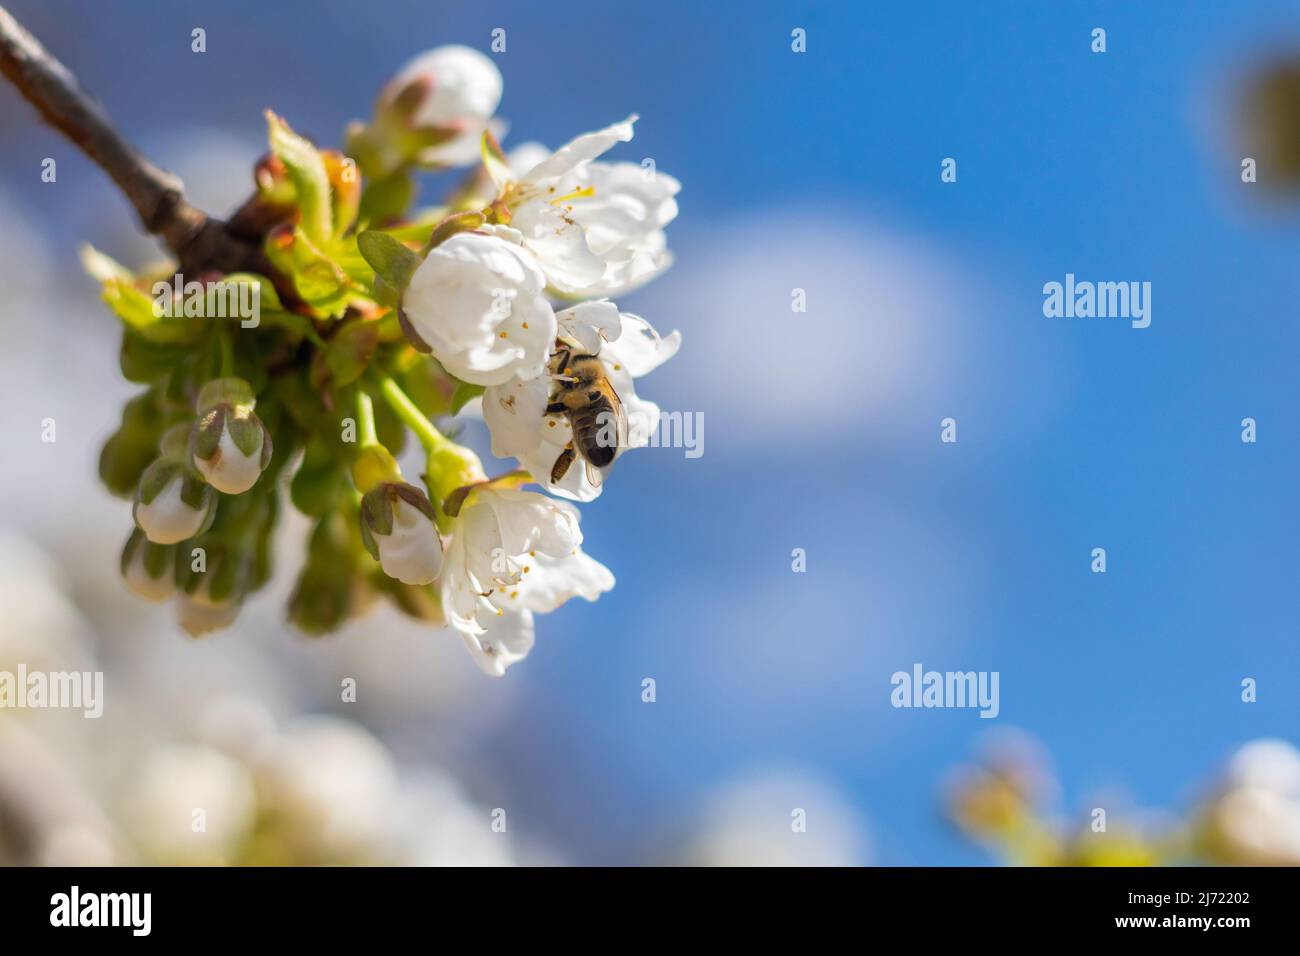 cherry blossoms in bloom on a branch with pollinating bee, sunny spring day with blue sky, close-up view Stock Photo